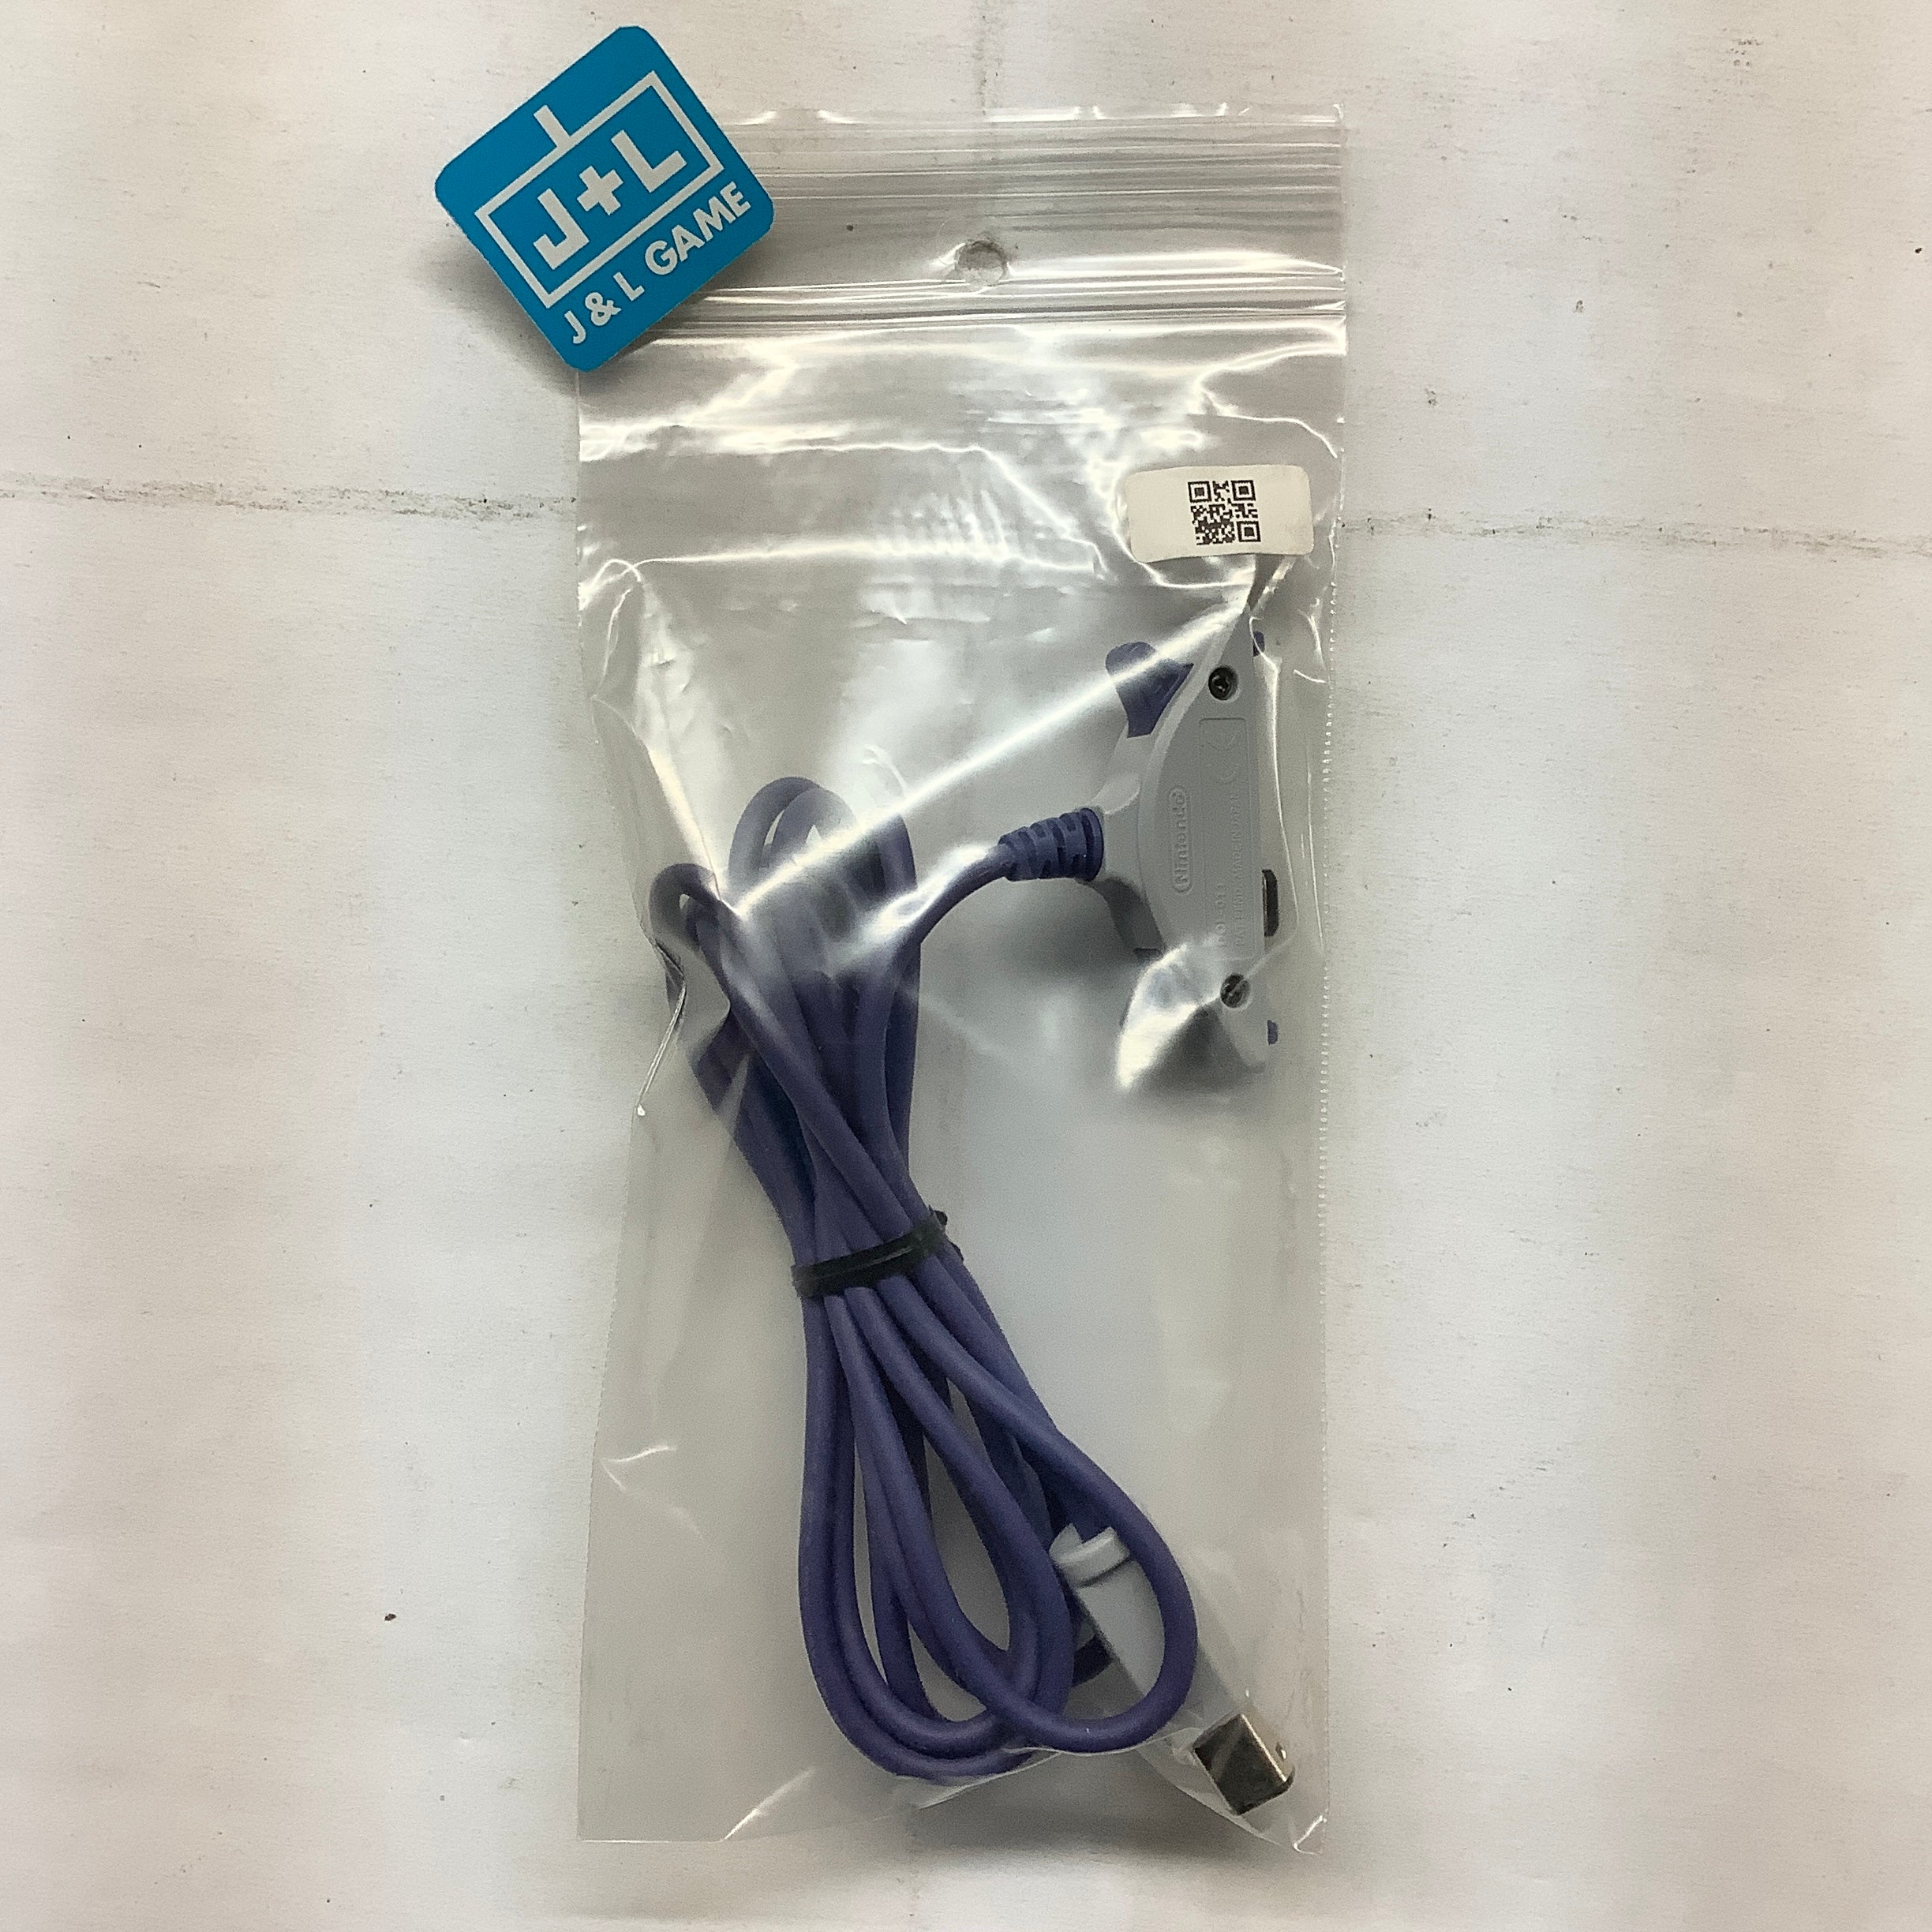 Nintendo GameCube Link Cable - (GBA) Game Boy Advance - (GC) GameCube [Pre-Owned] Accessories Nintendo   